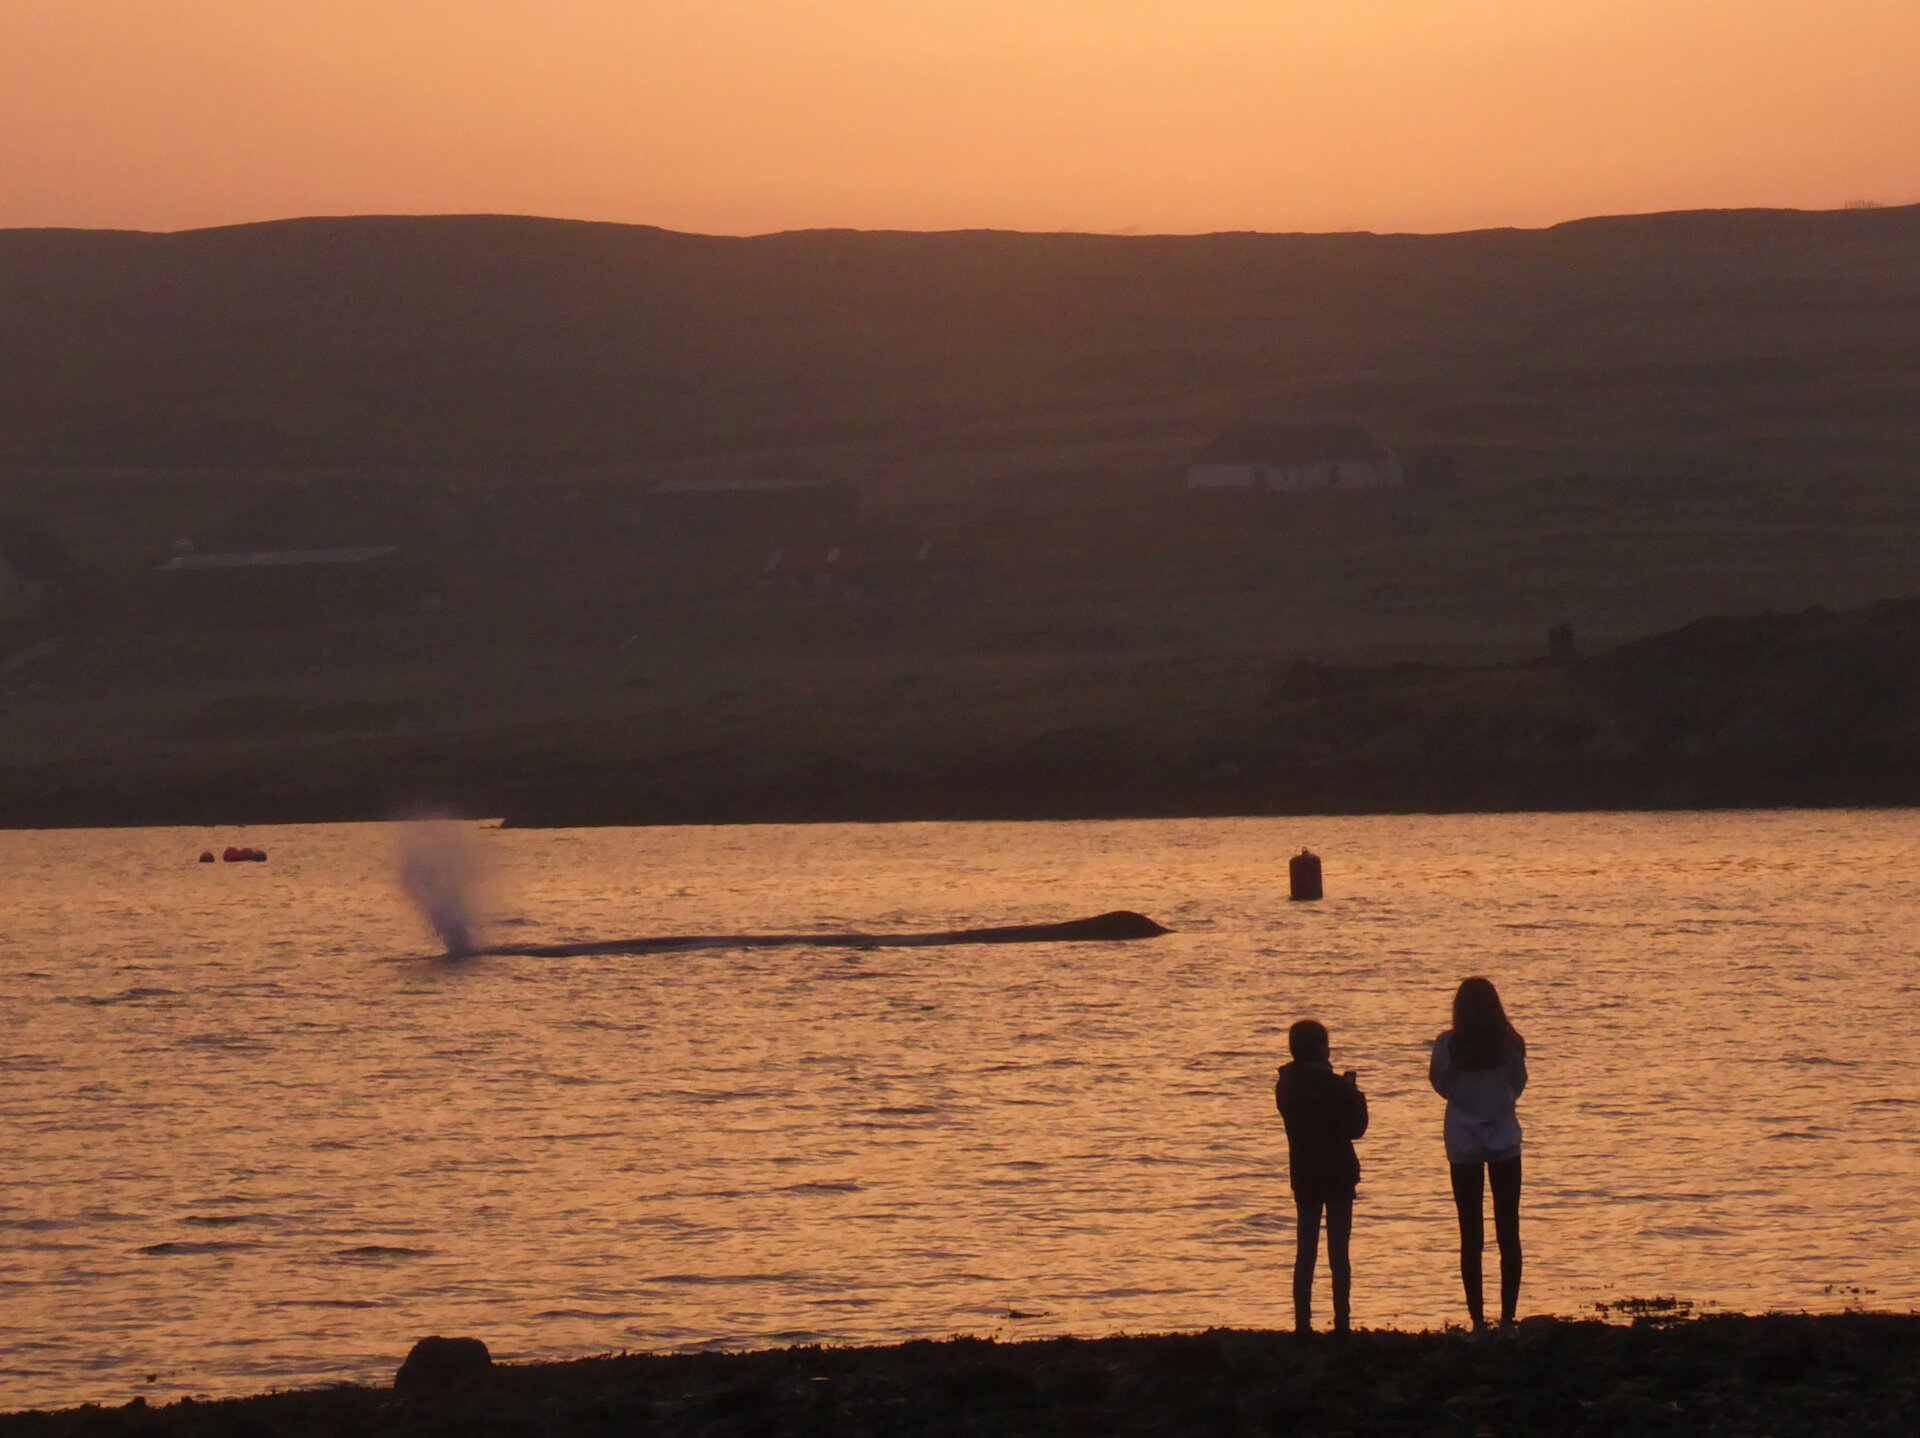 Whale watching from the shore is one of the greatest pleasures of life in Shetland. | Catherine Munro